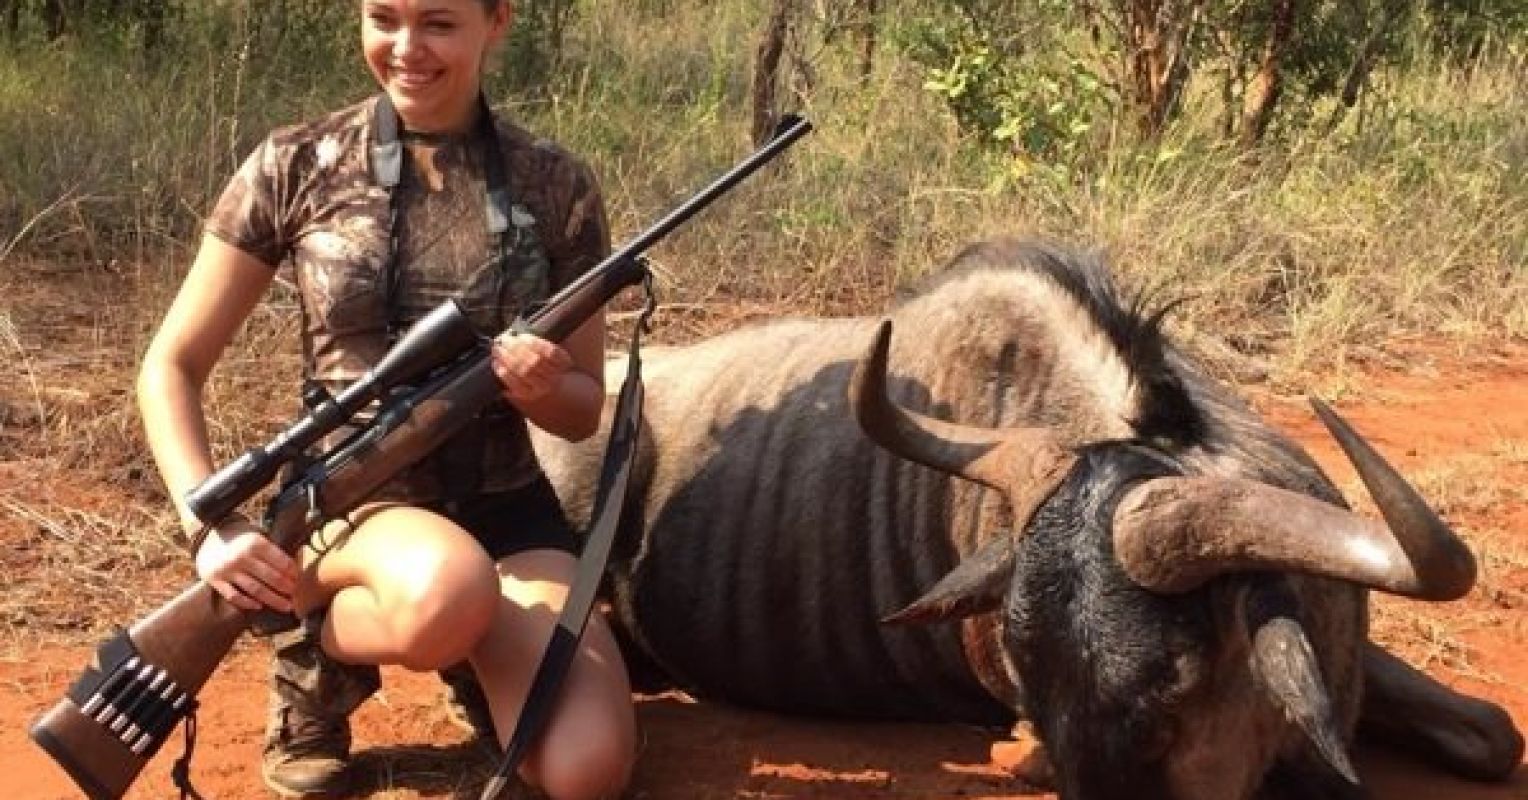 Psychology of trophy hunting: why some people kill animals for sport